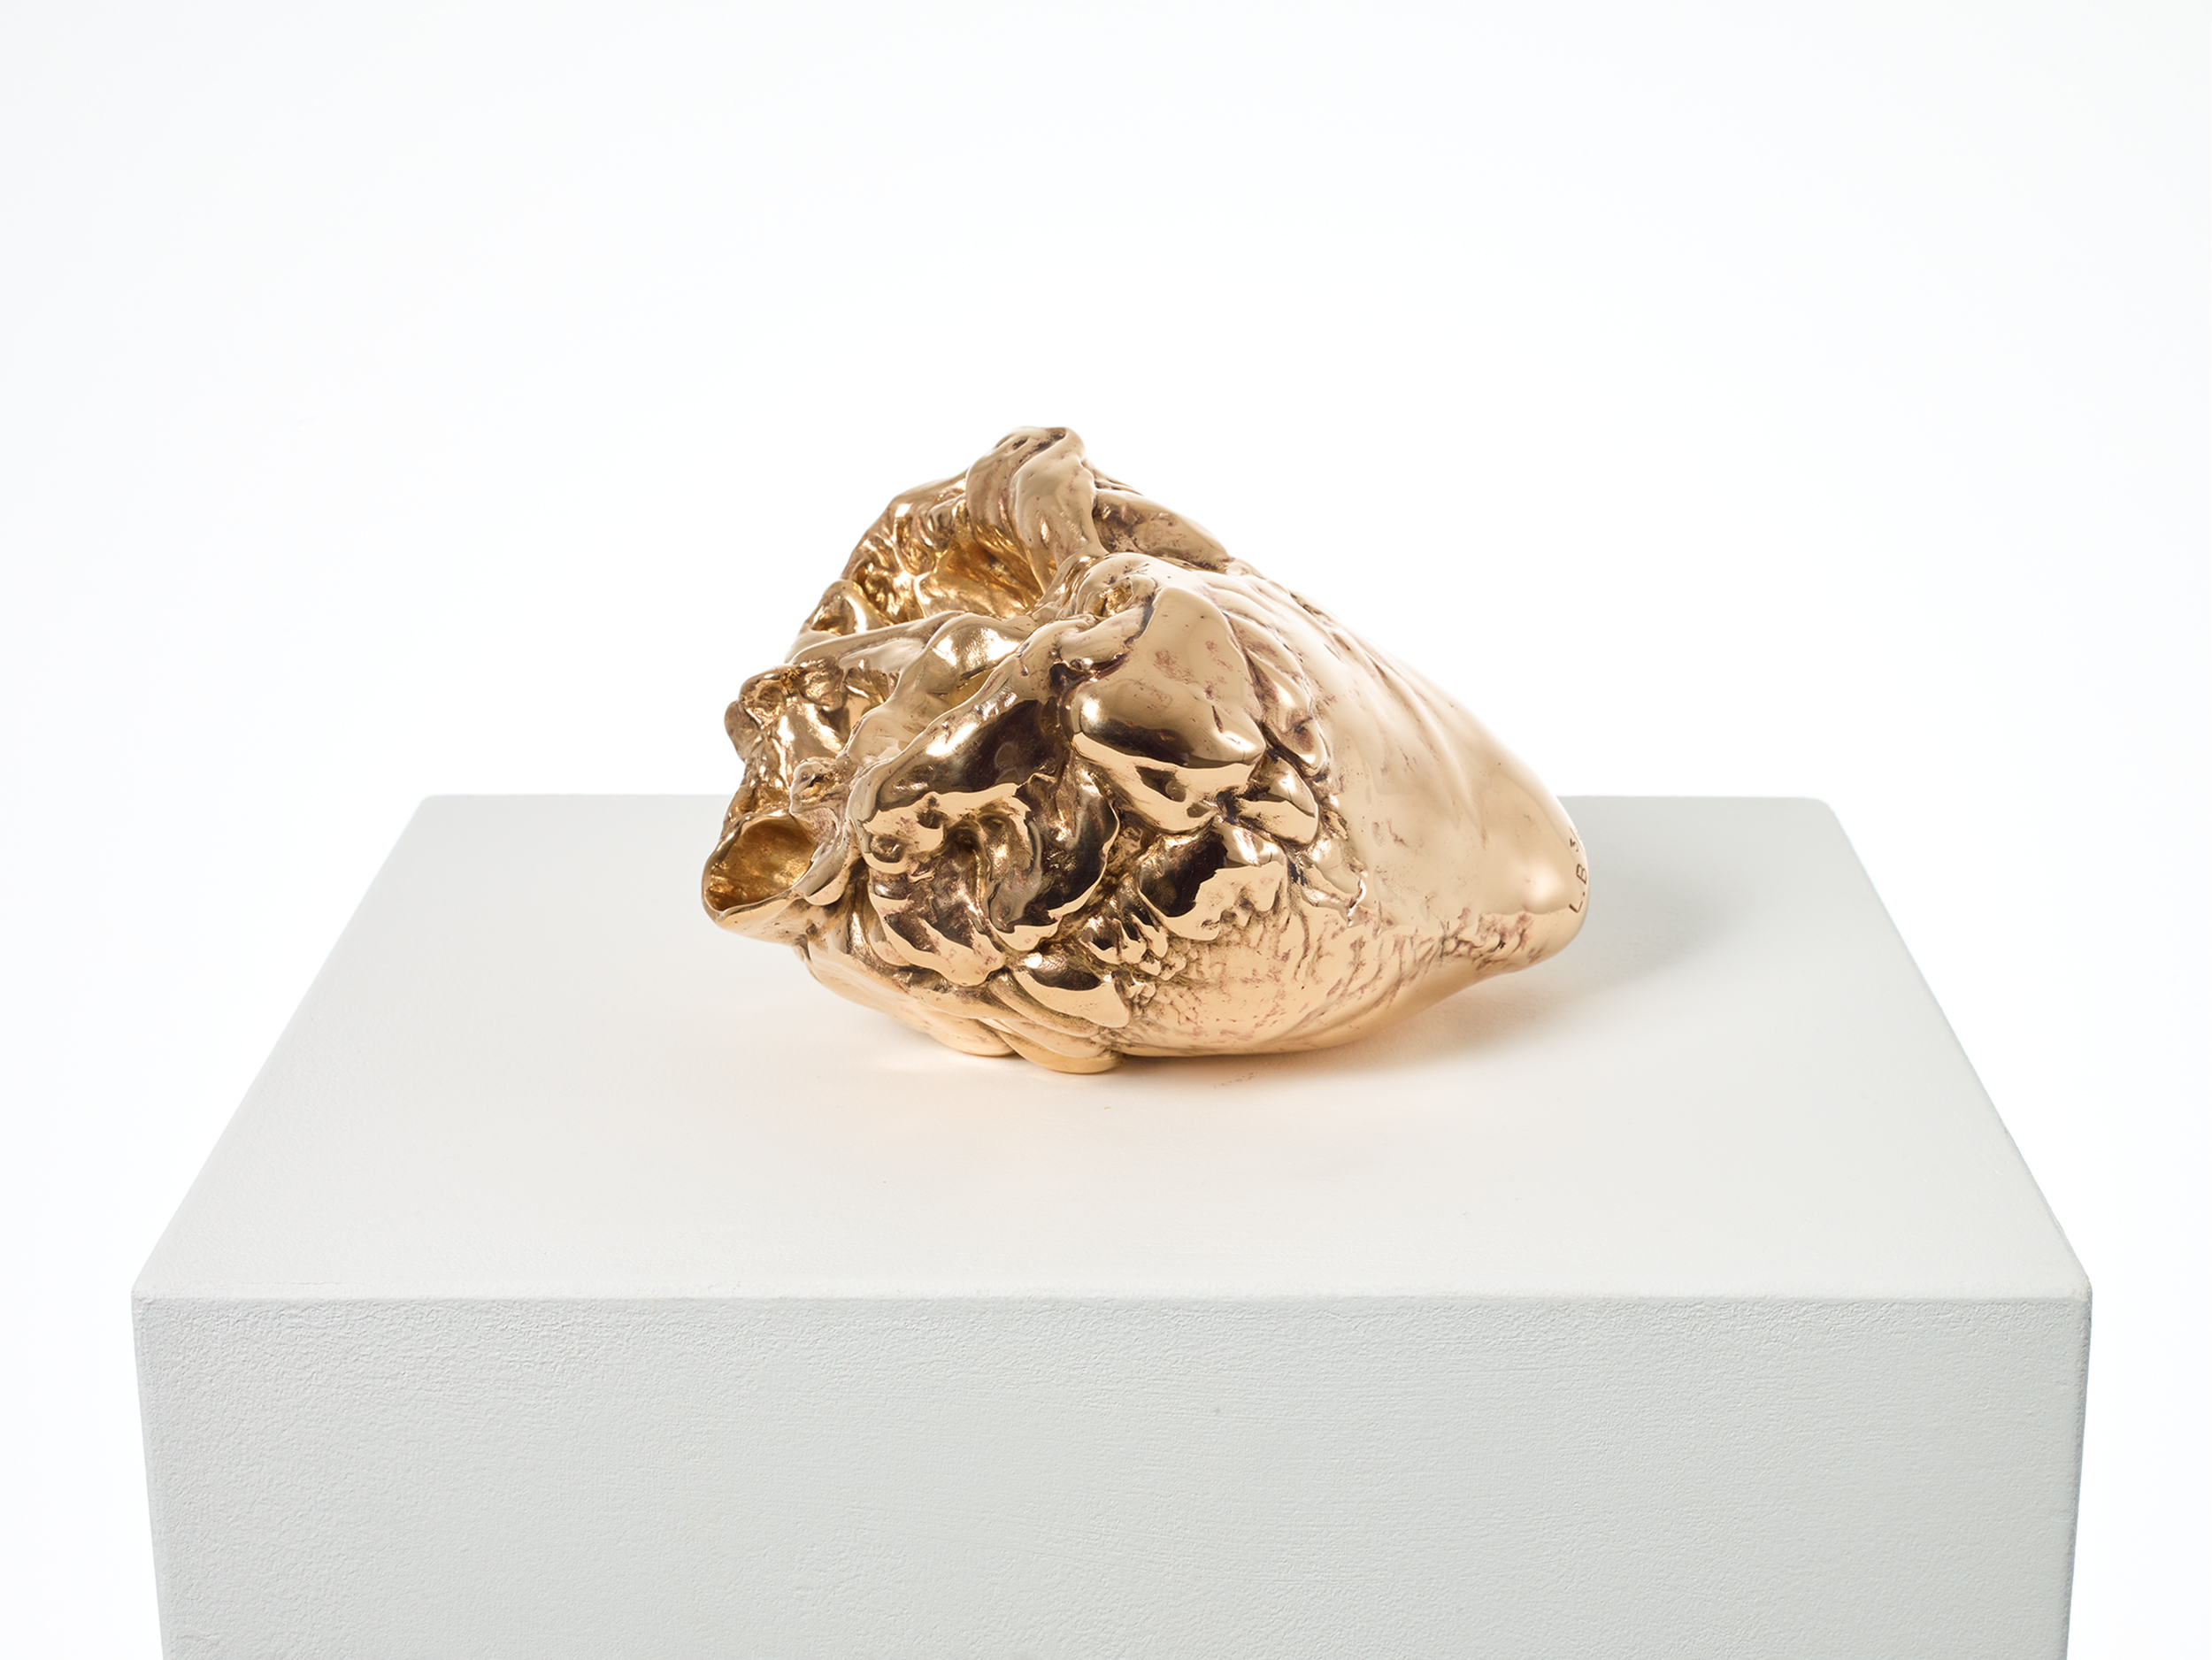 Louise Bourgeois's scultpure Heart